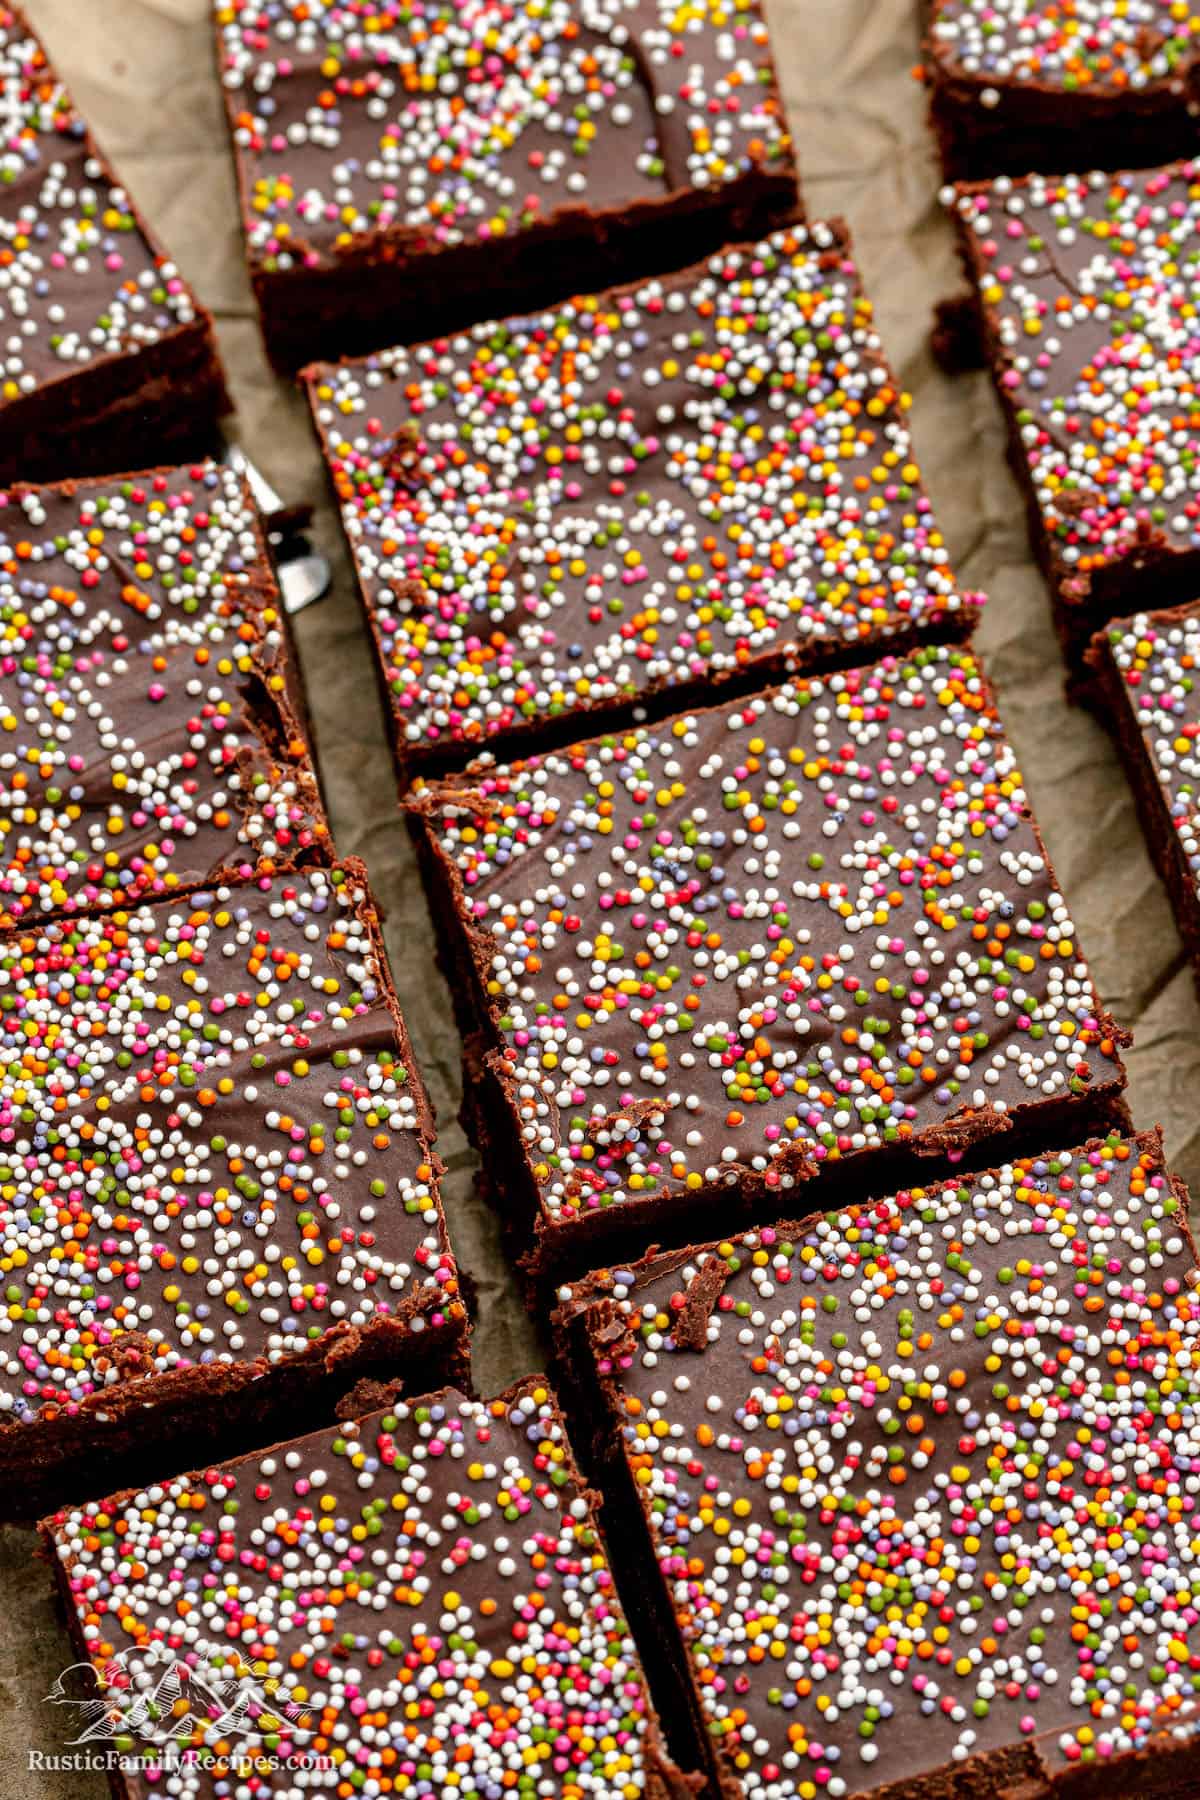 A close-up shot of frosted brownies with nonpareil sprinkles on top